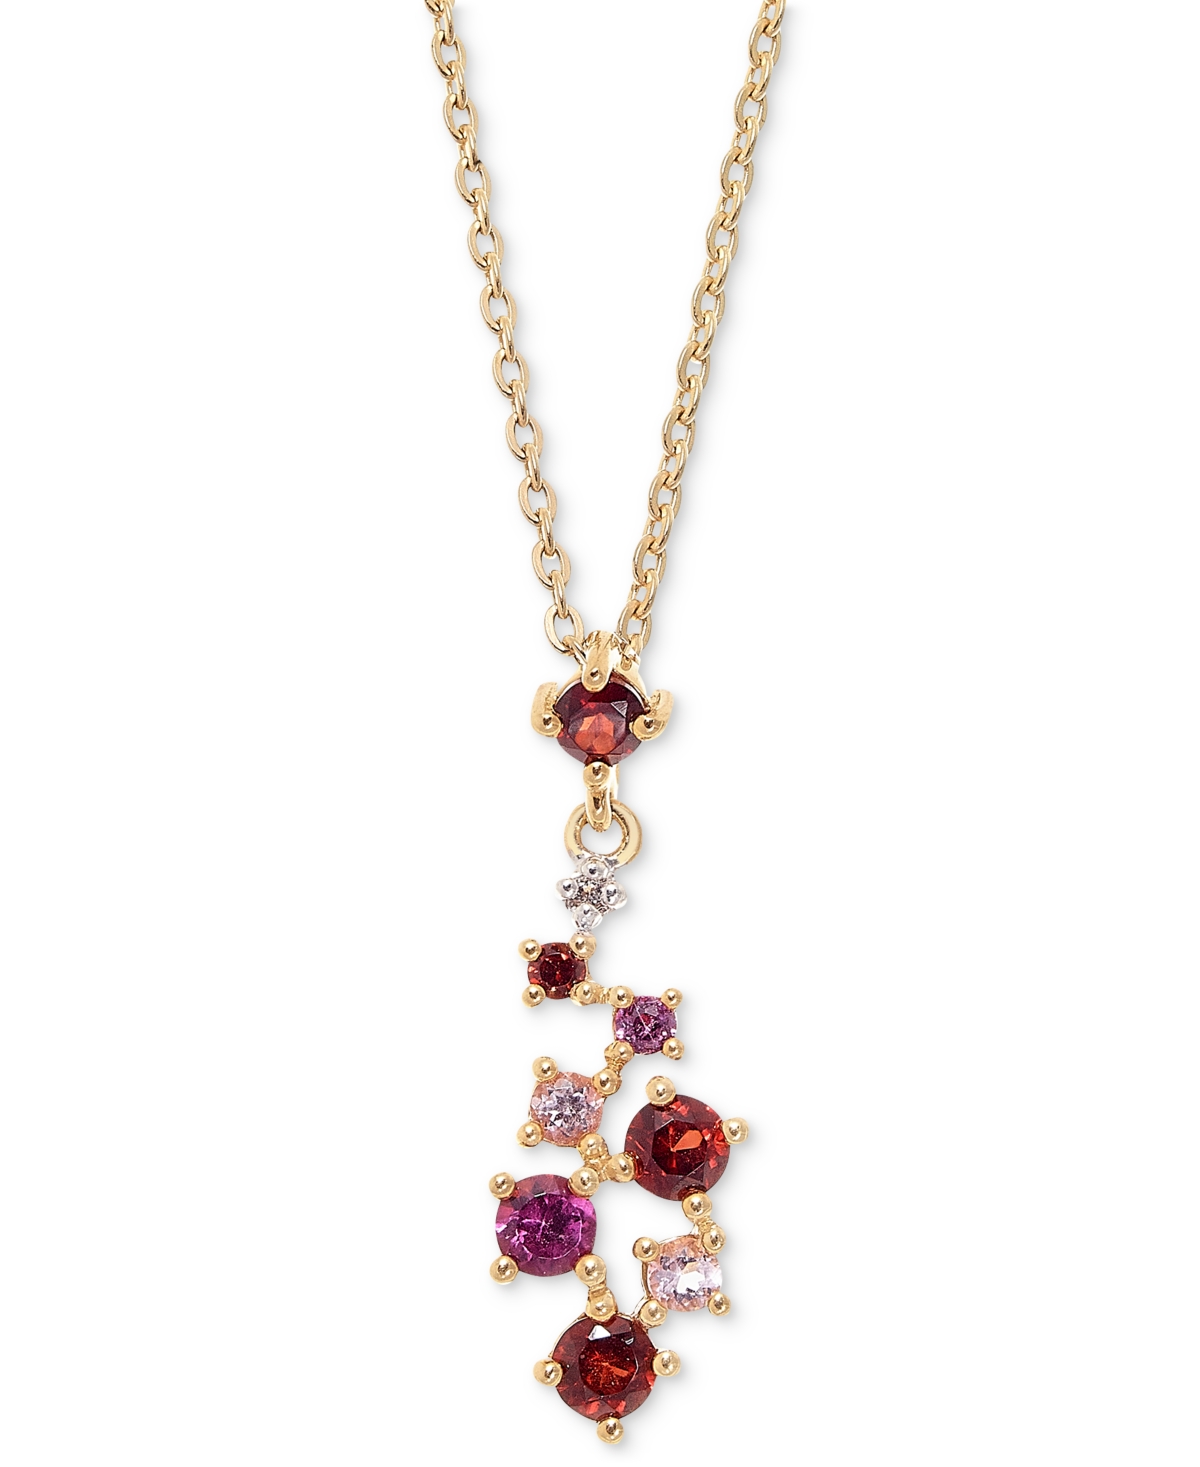 Macy's Multi-gemstone (5/8 Ct. T.w.) Cluster Pendant Necklace In 14k Gold Over Sterling Silver, 18"